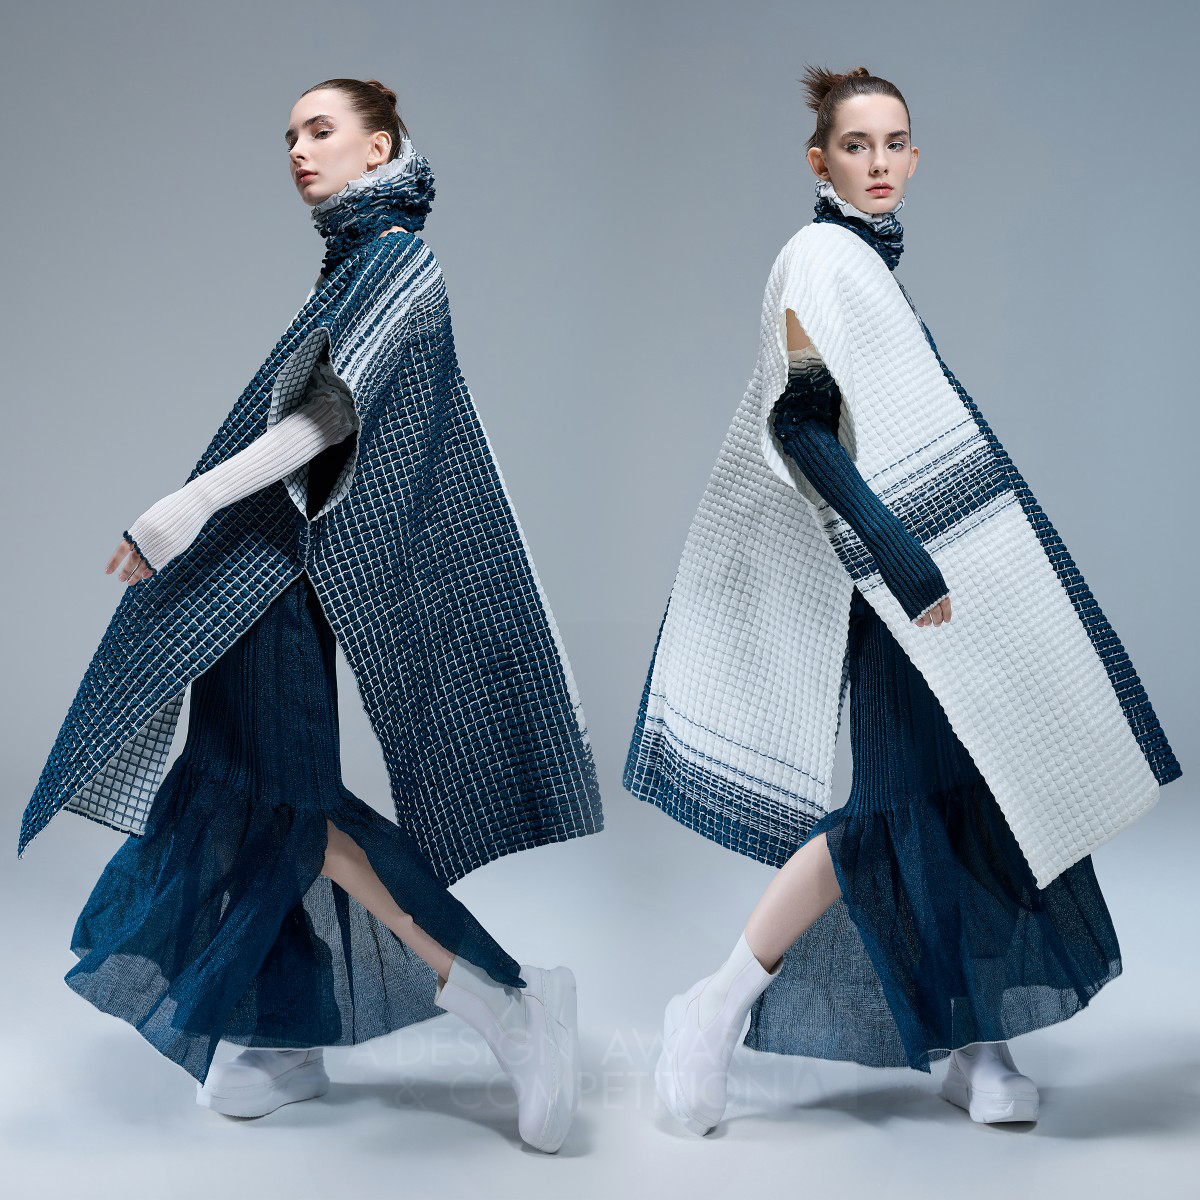 The Opposite Multi-wear Fashion Collection by Yishu Yan